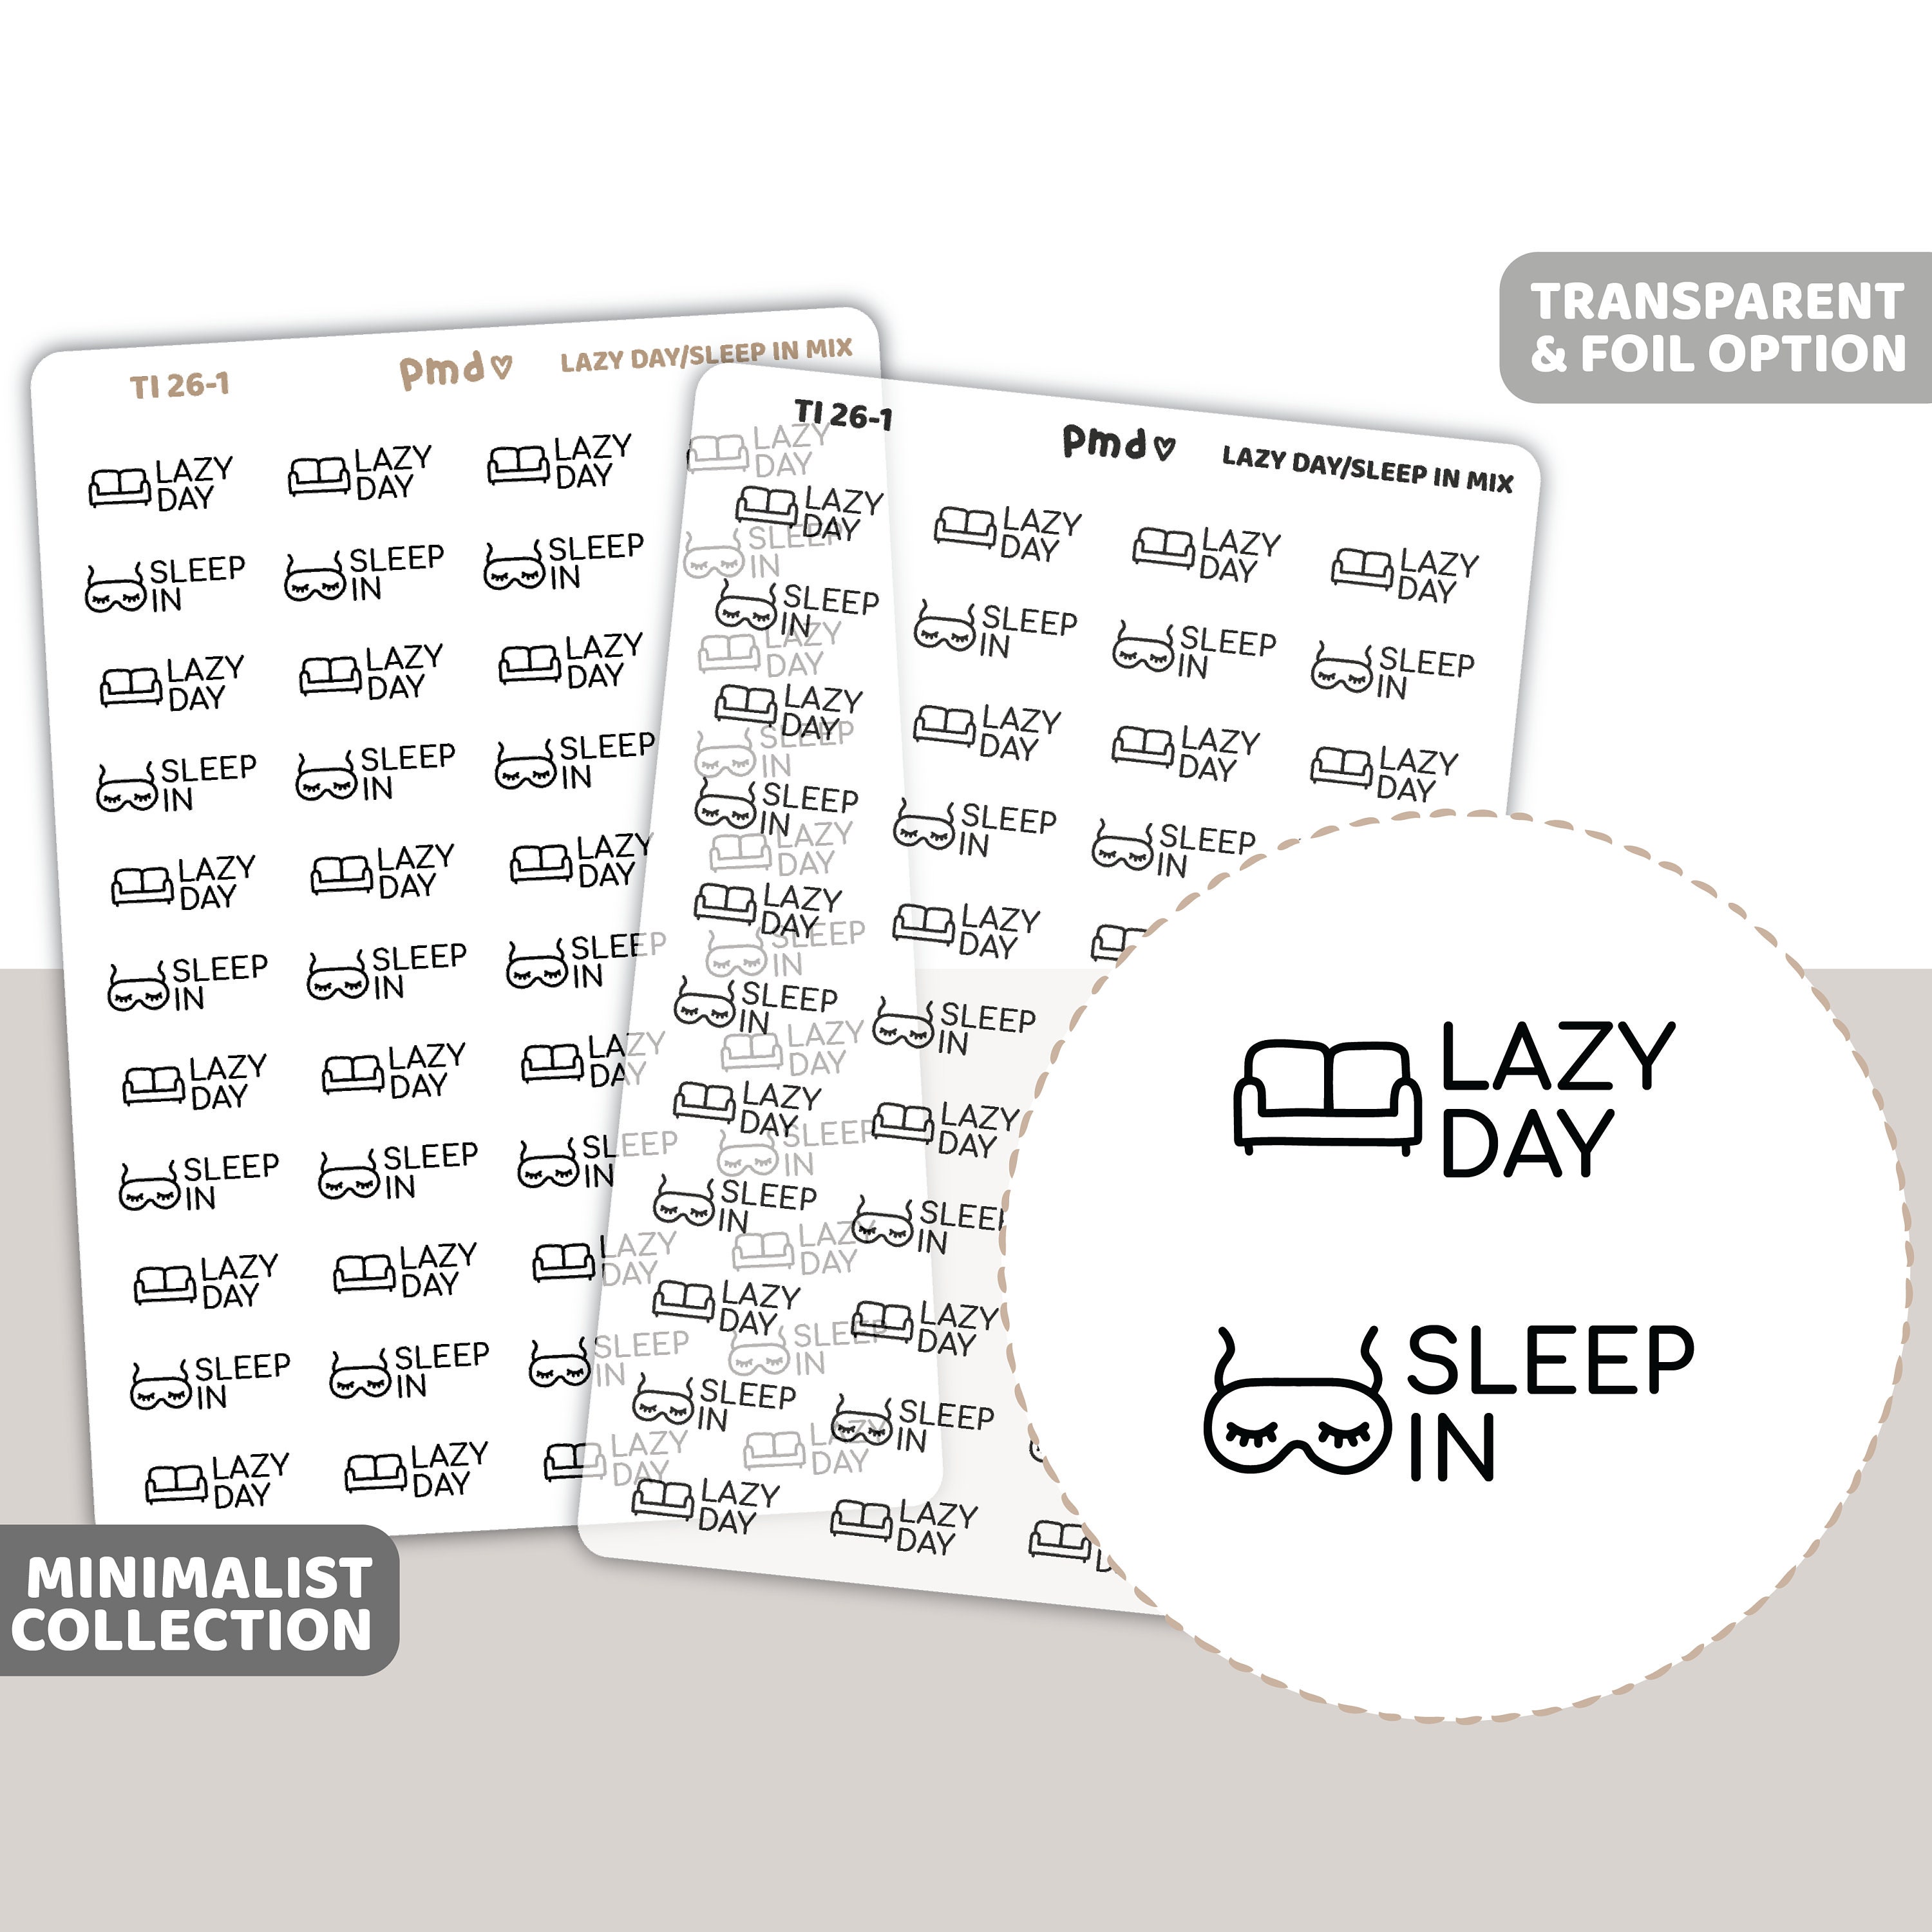 No Sleep in Word Stickers Perfect for the Standard Life Vertical,  Horizonta, Kikki K or Kate Spade Pastel Rainbow 28 Stickers M055 